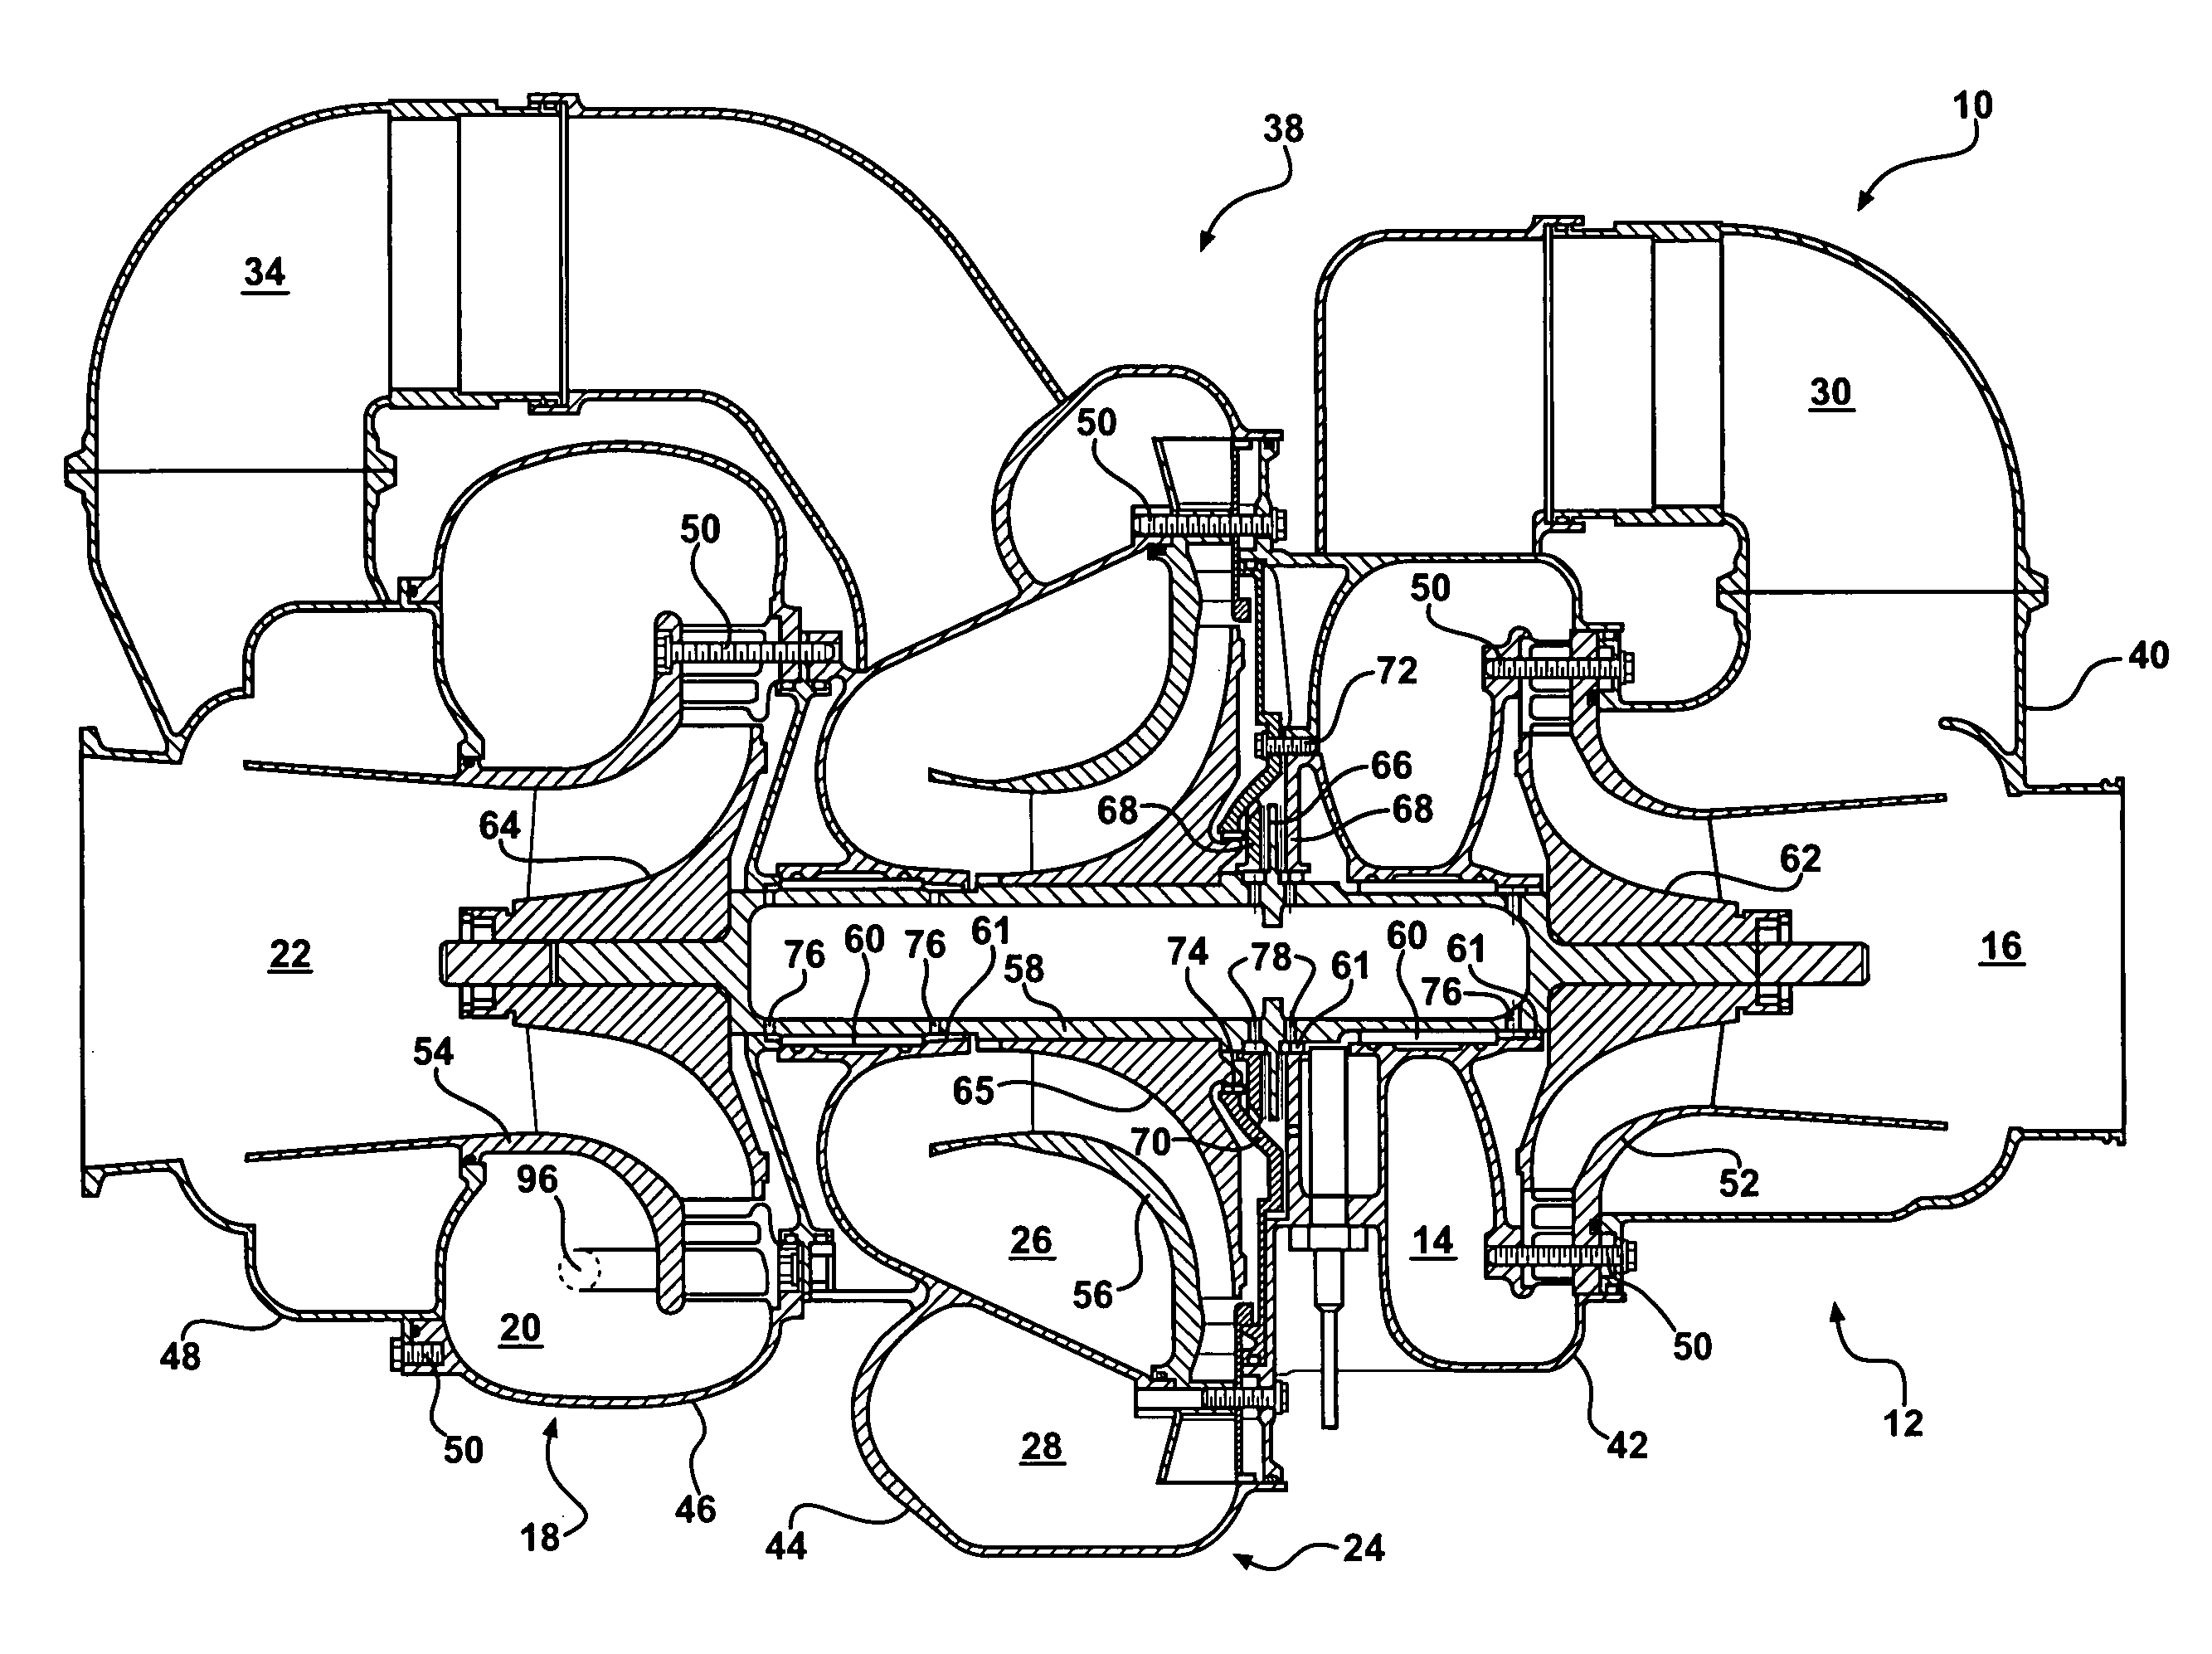 ACM cooling flow path and thrust load design